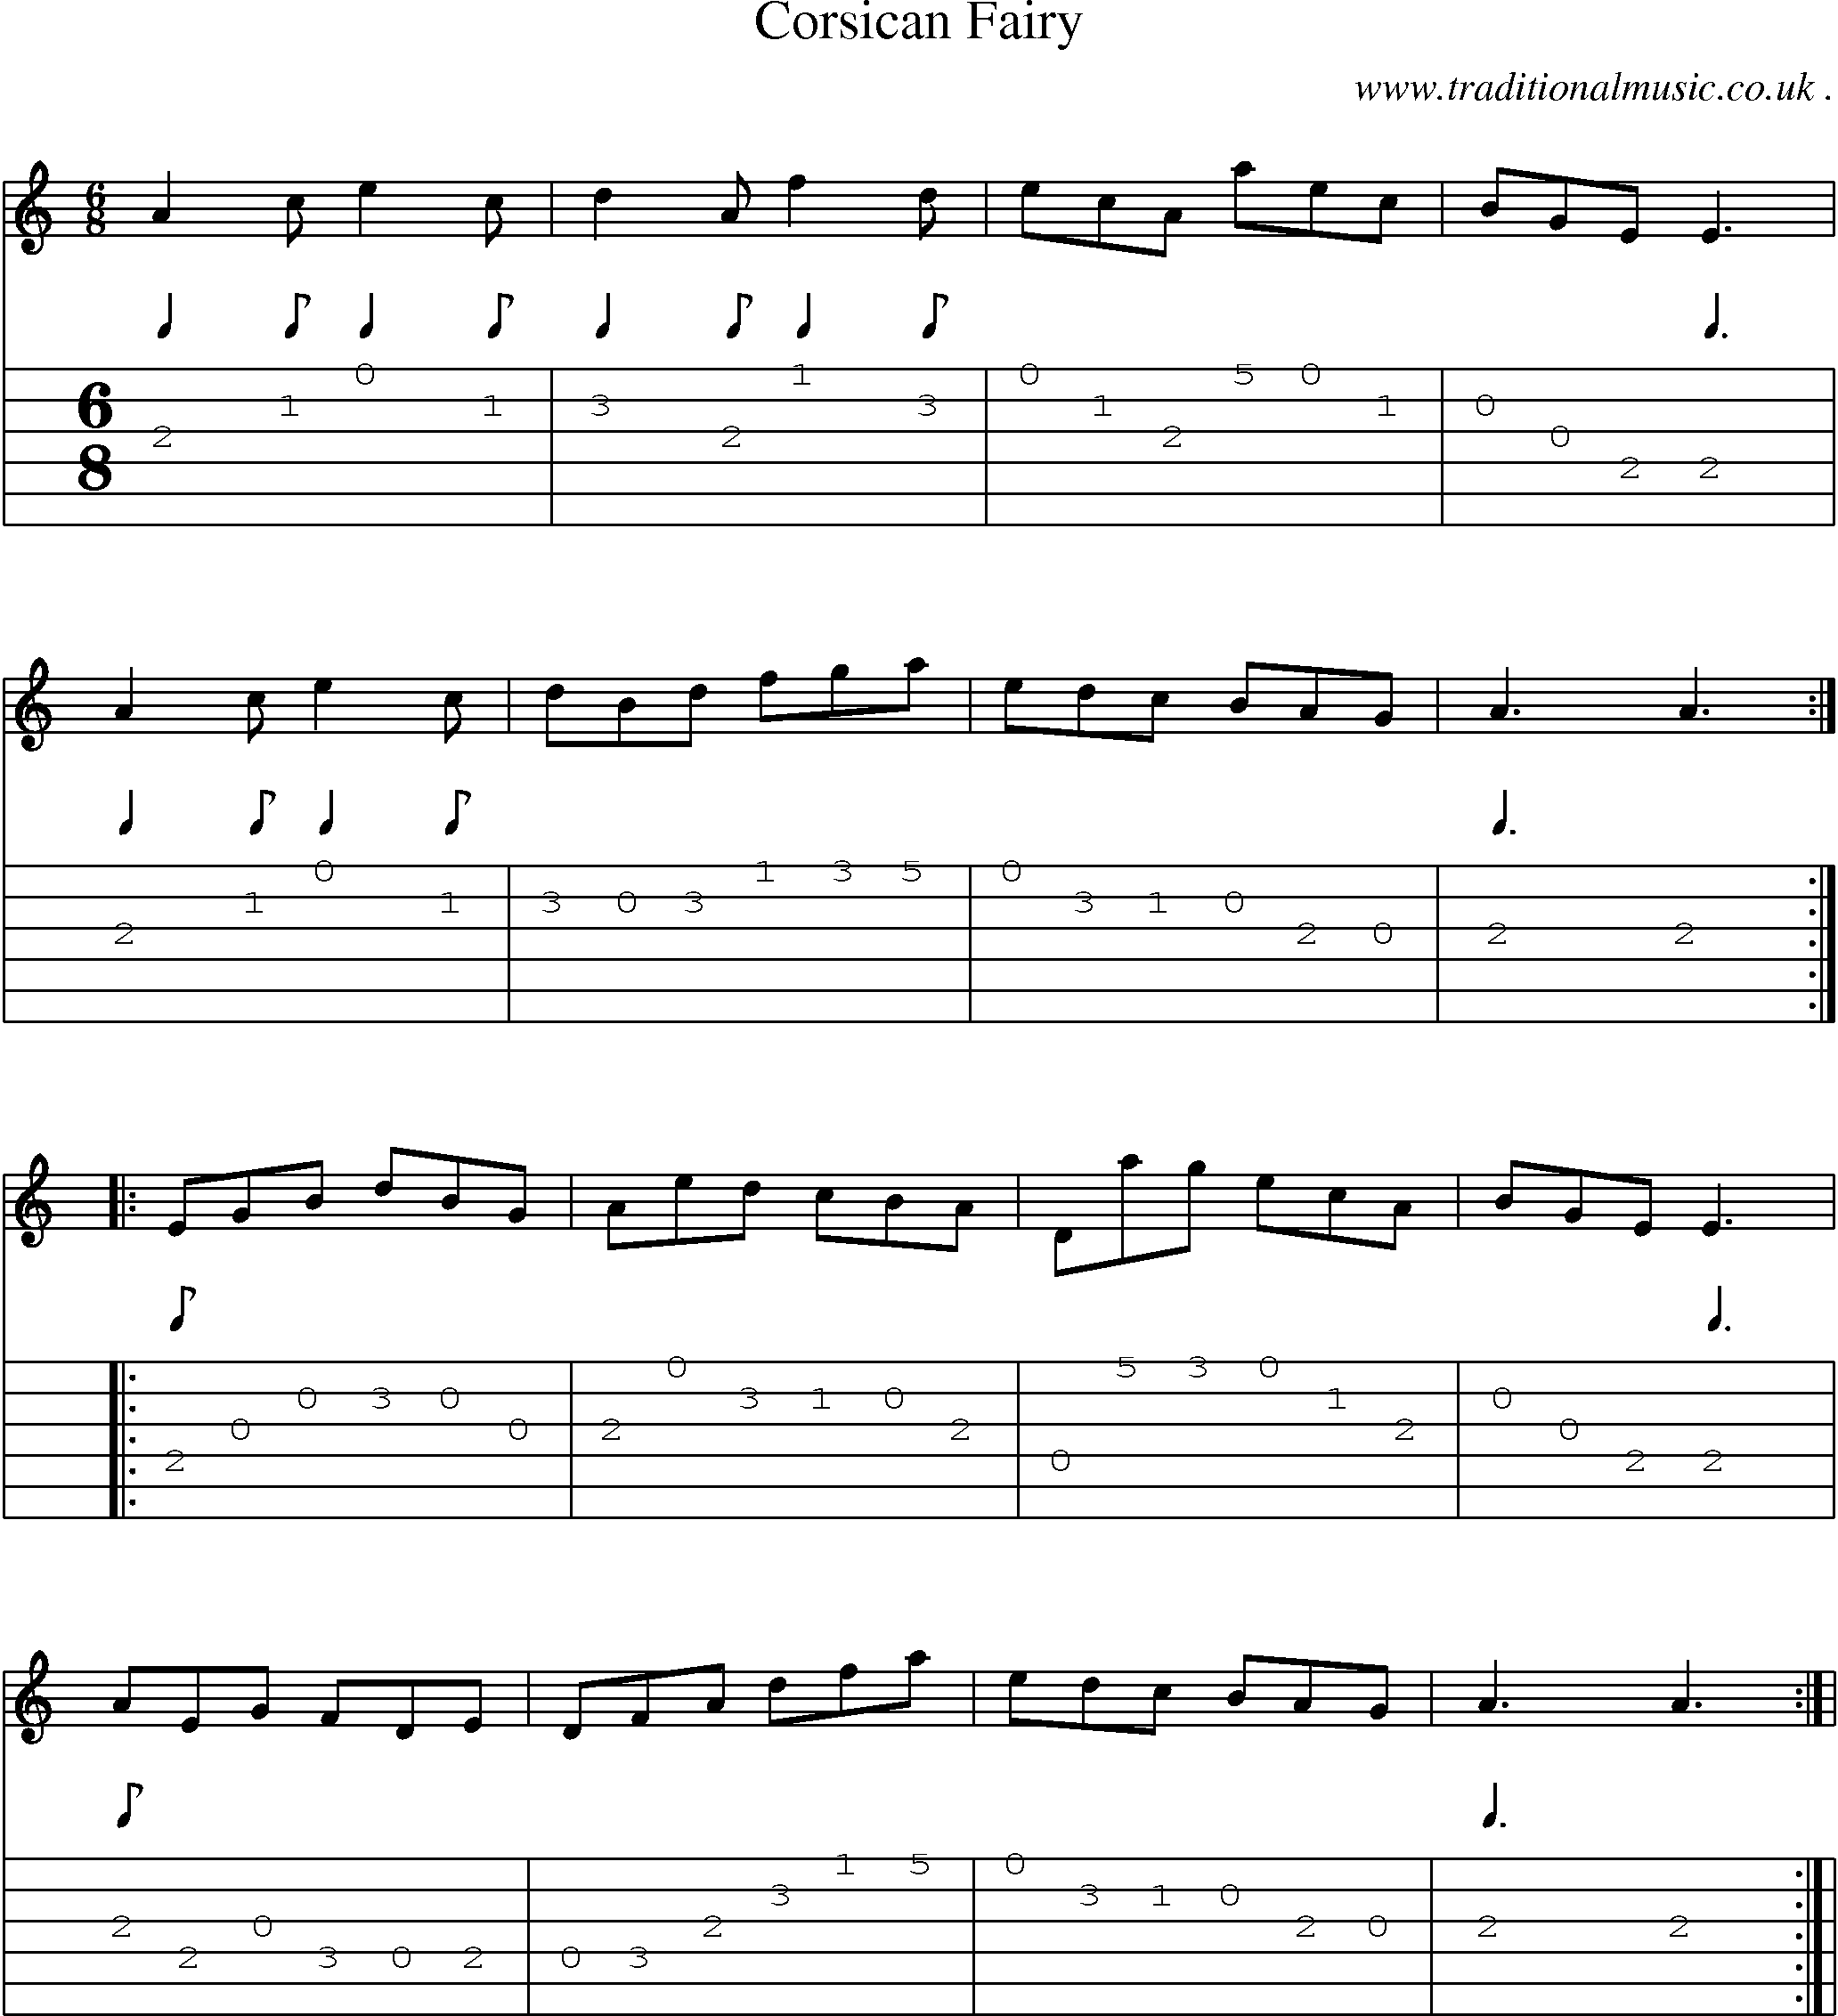 Sheet-Music and Guitar Tabs for Corsican Fairy